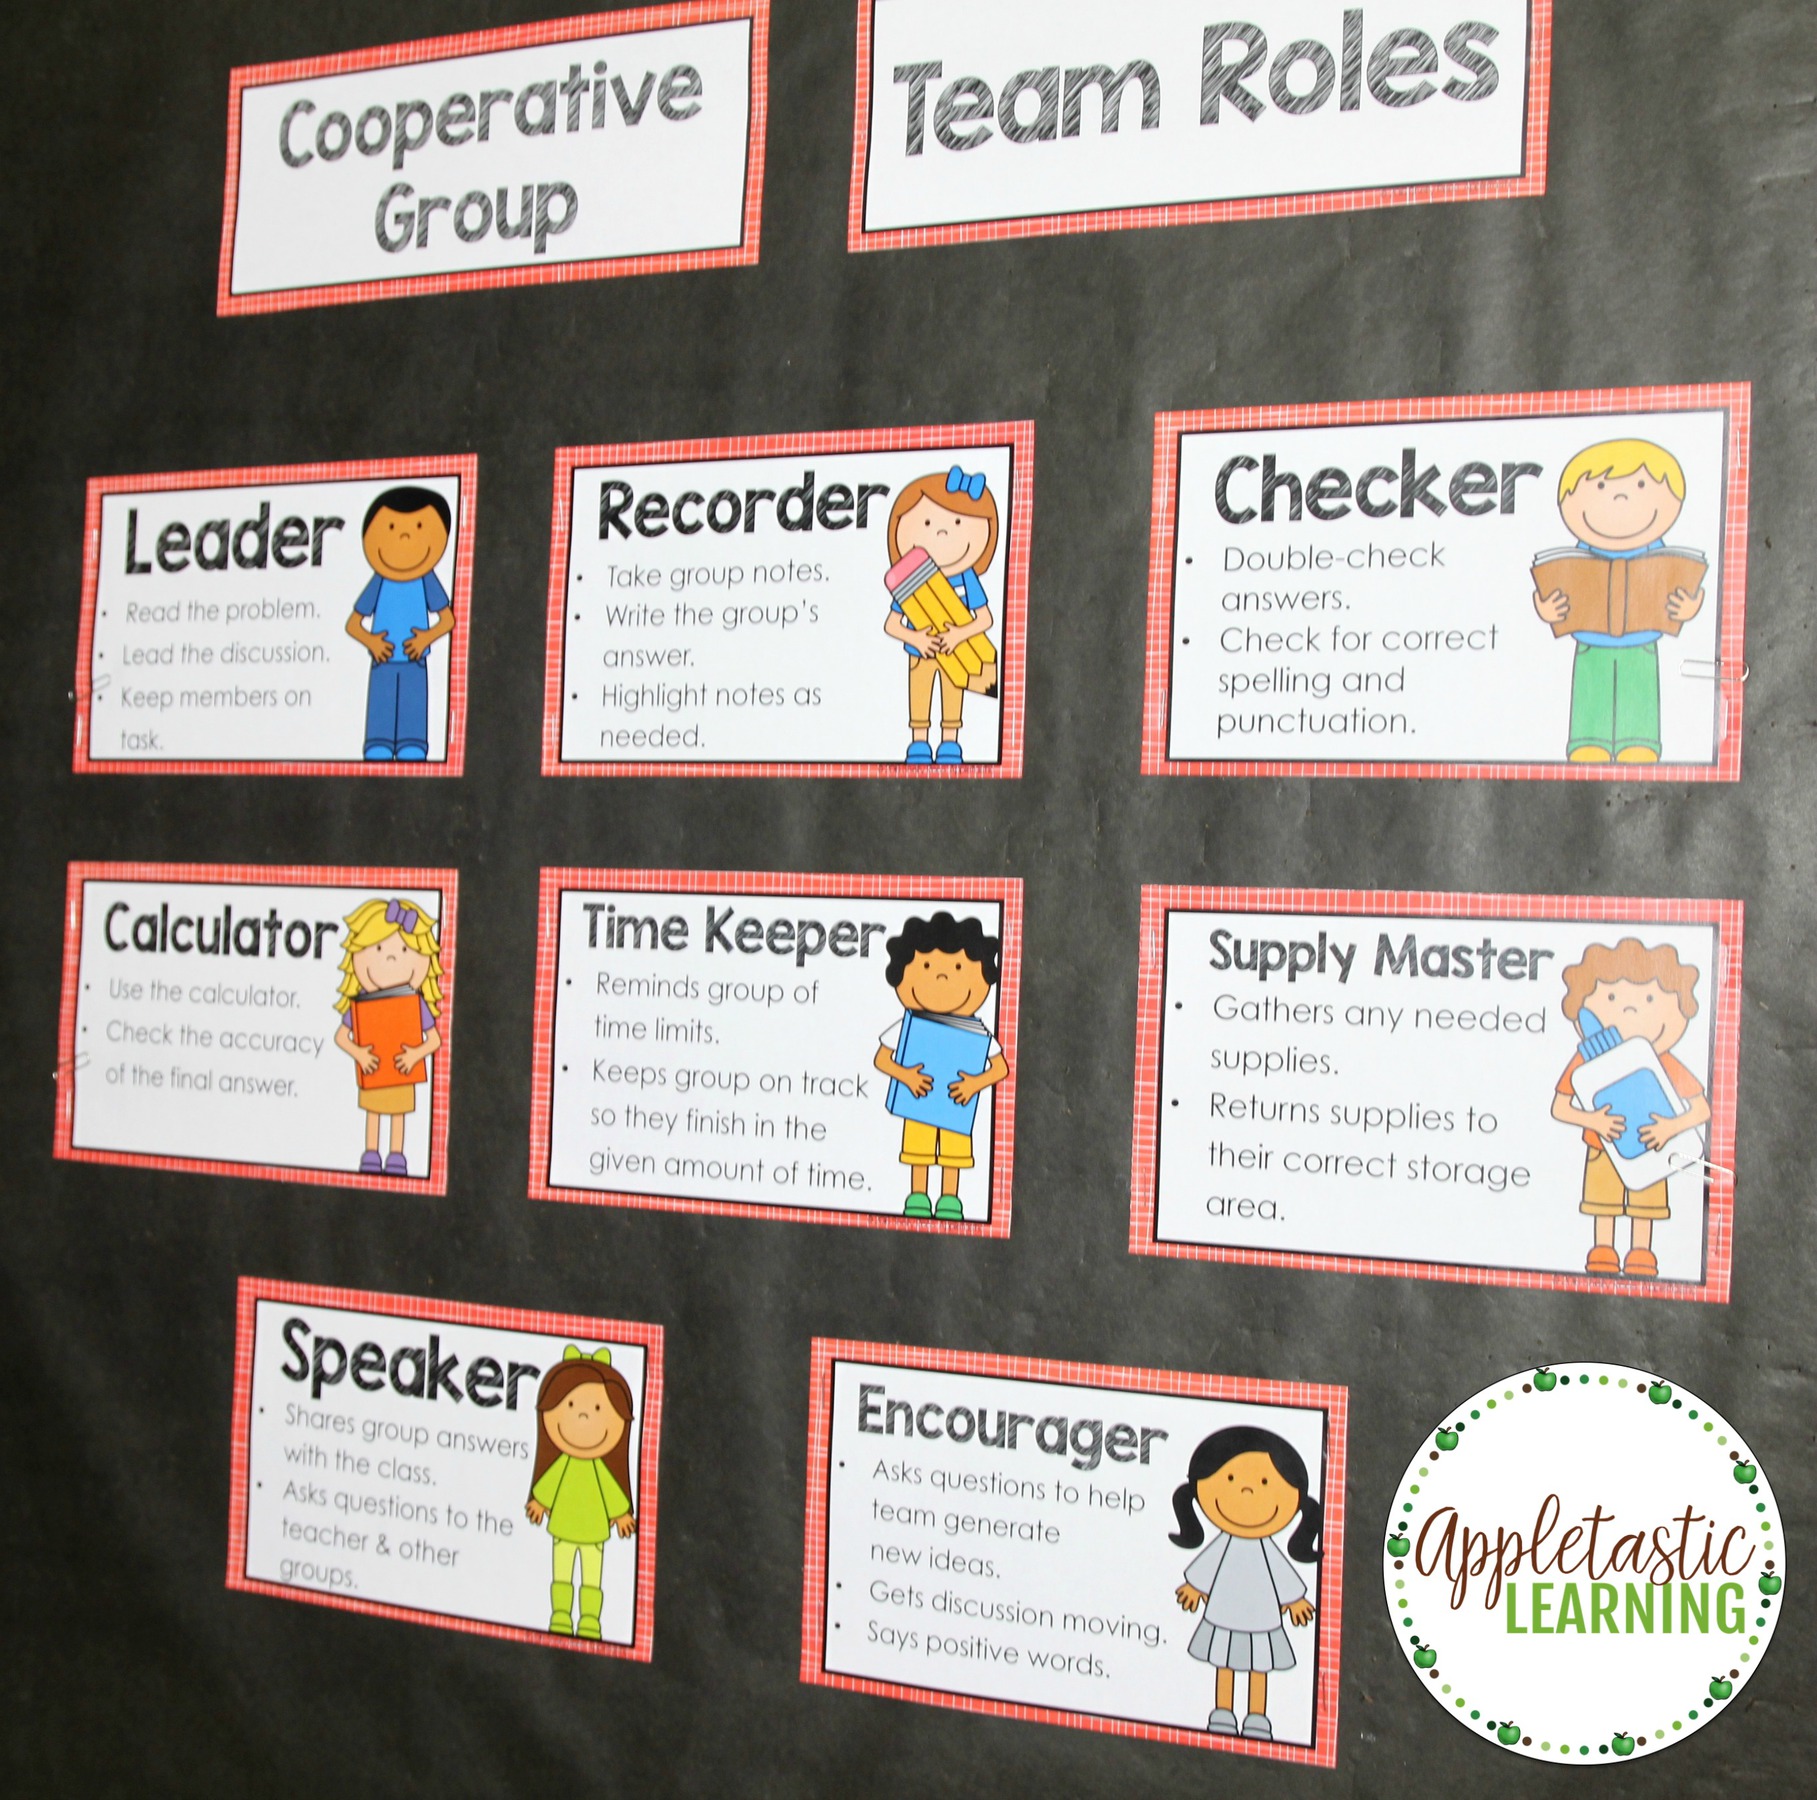 Group roles